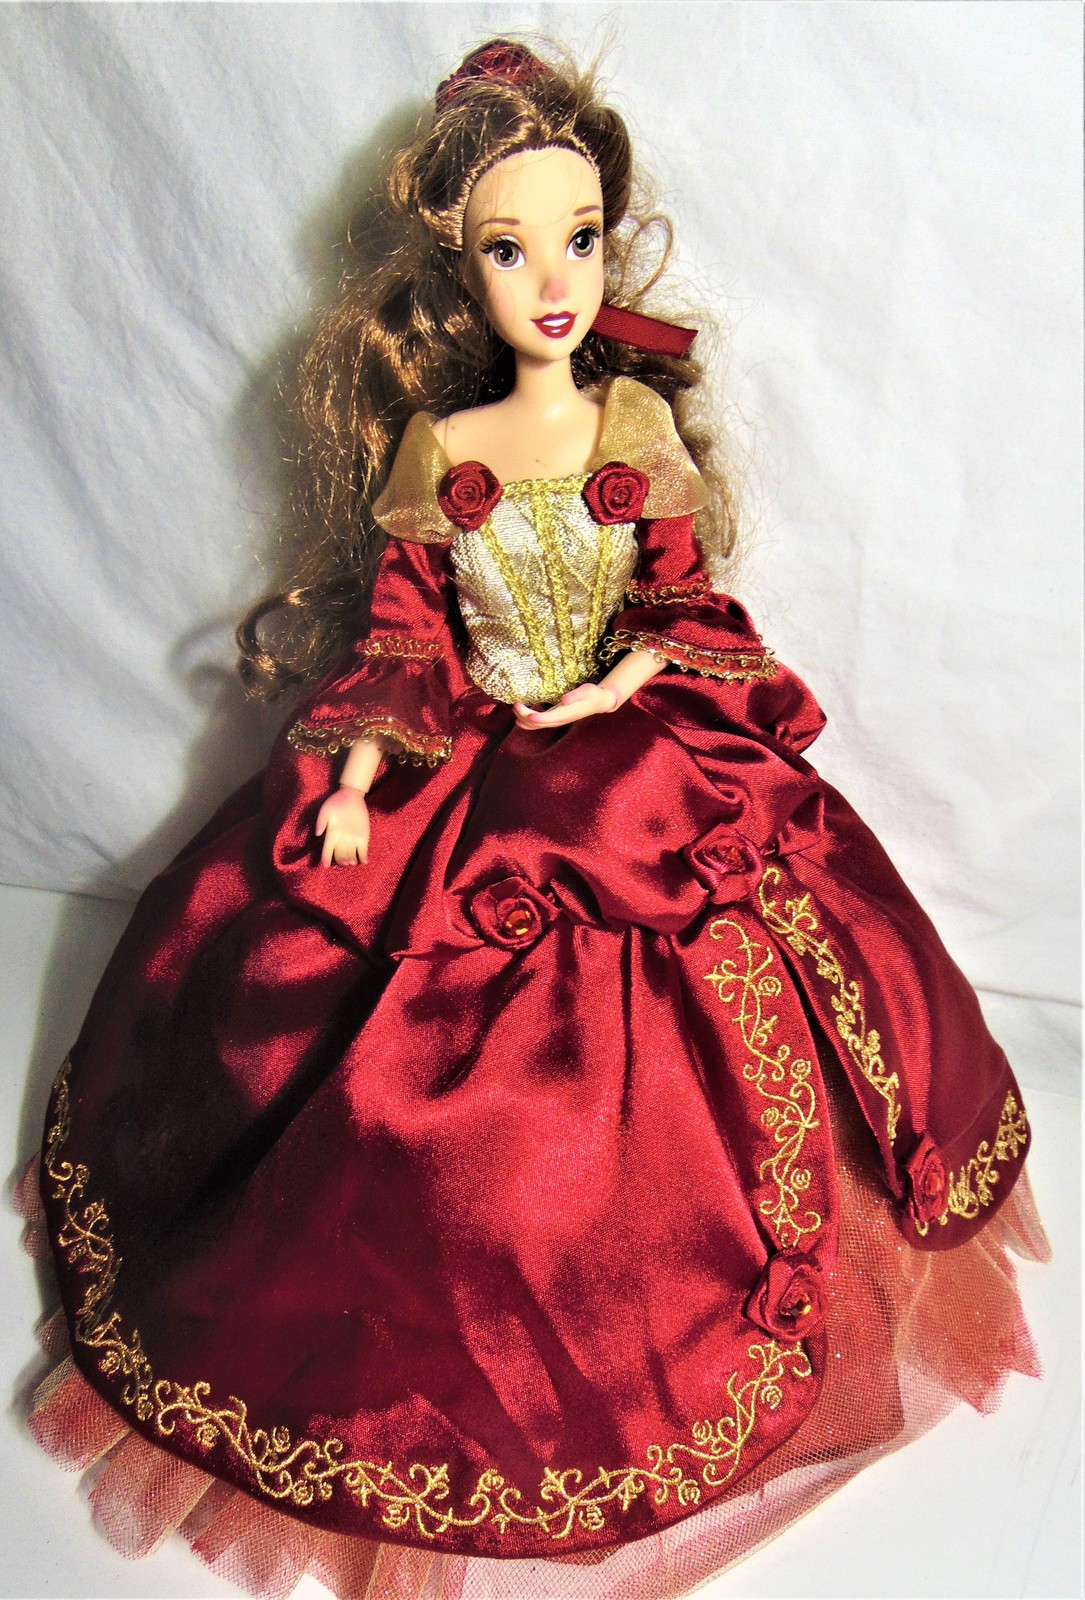 Deluxe Edition Bell Doll, Disney Store Exclusive Pre-Owned - Disney